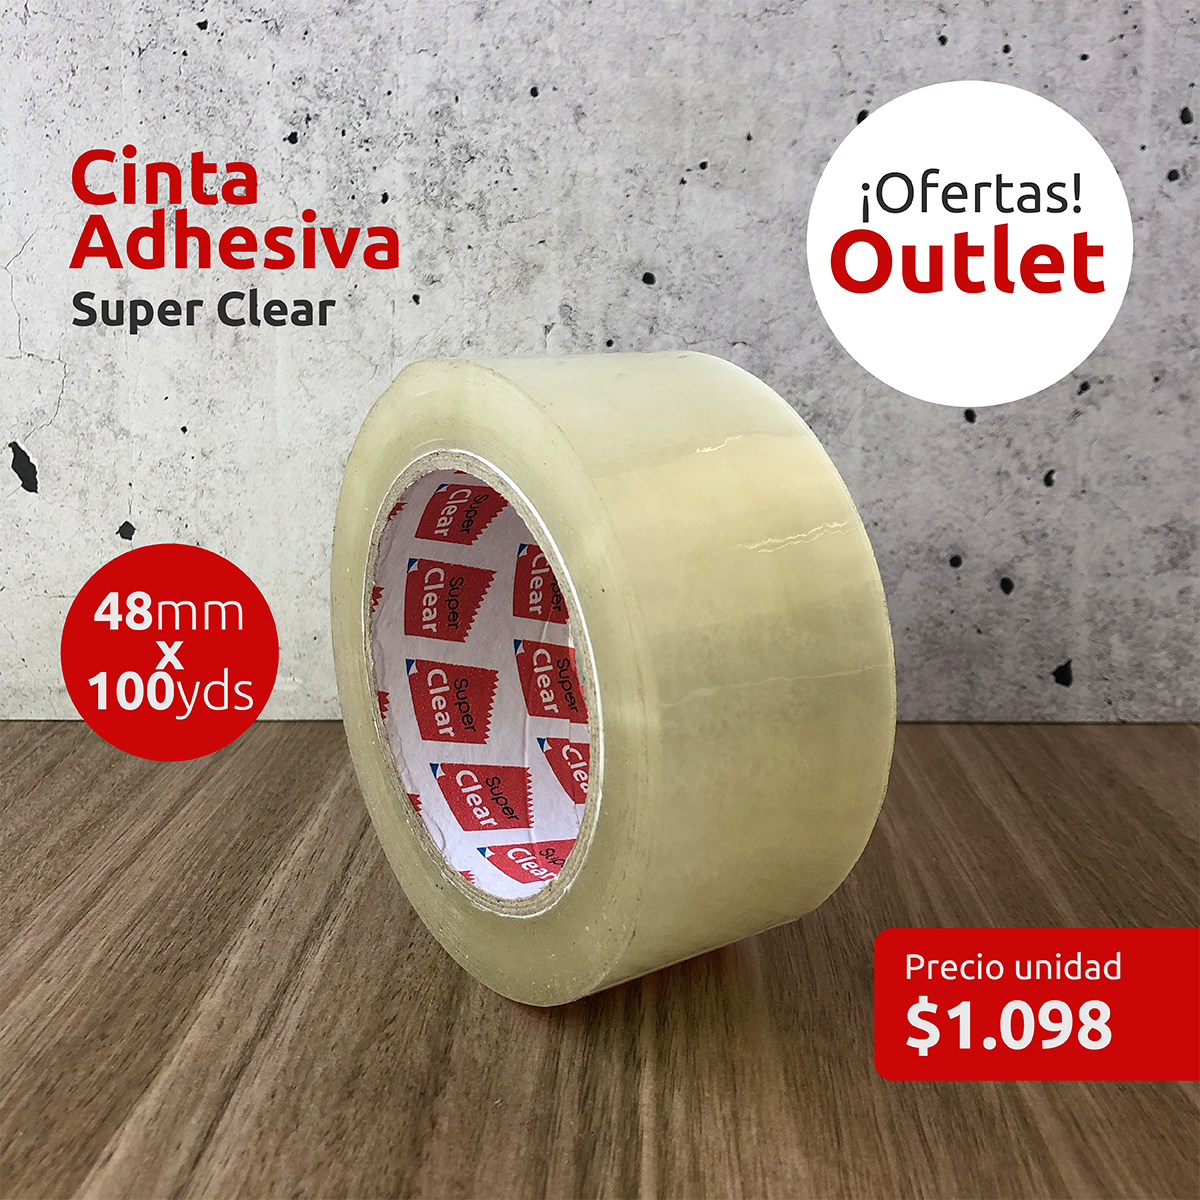 OUTLET - Cinta adhesiva SuperClear